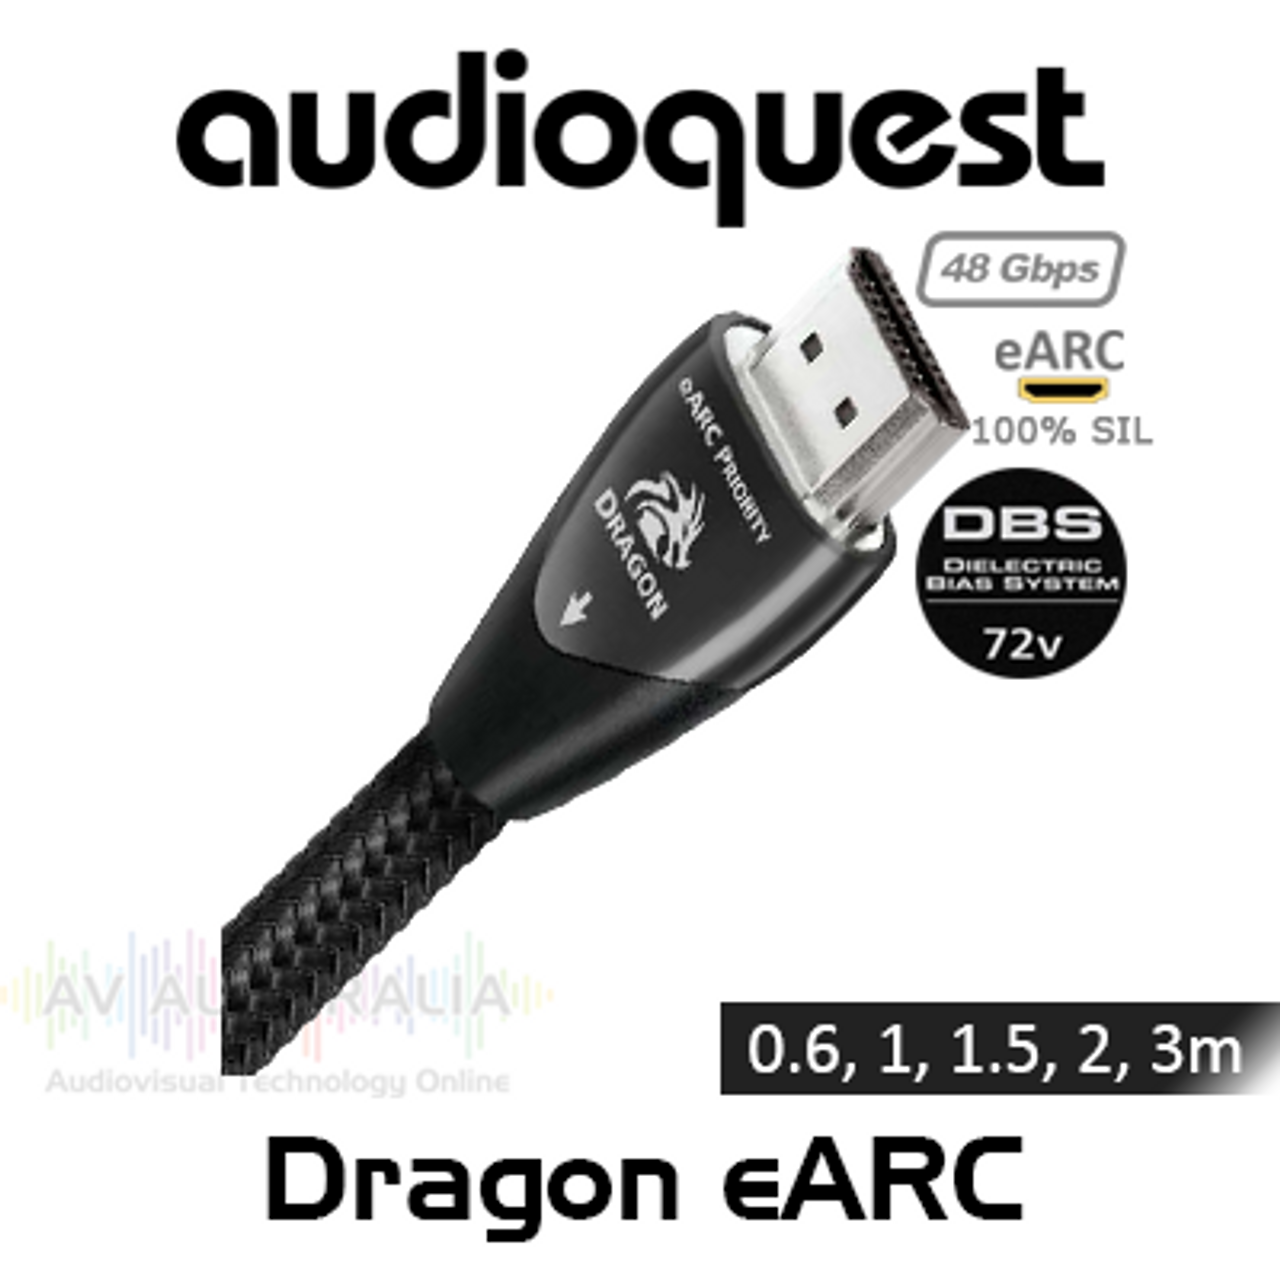 AudioQuest Dragon eARC 72V DBS 8K/10K 48Gbps HDMI Cable